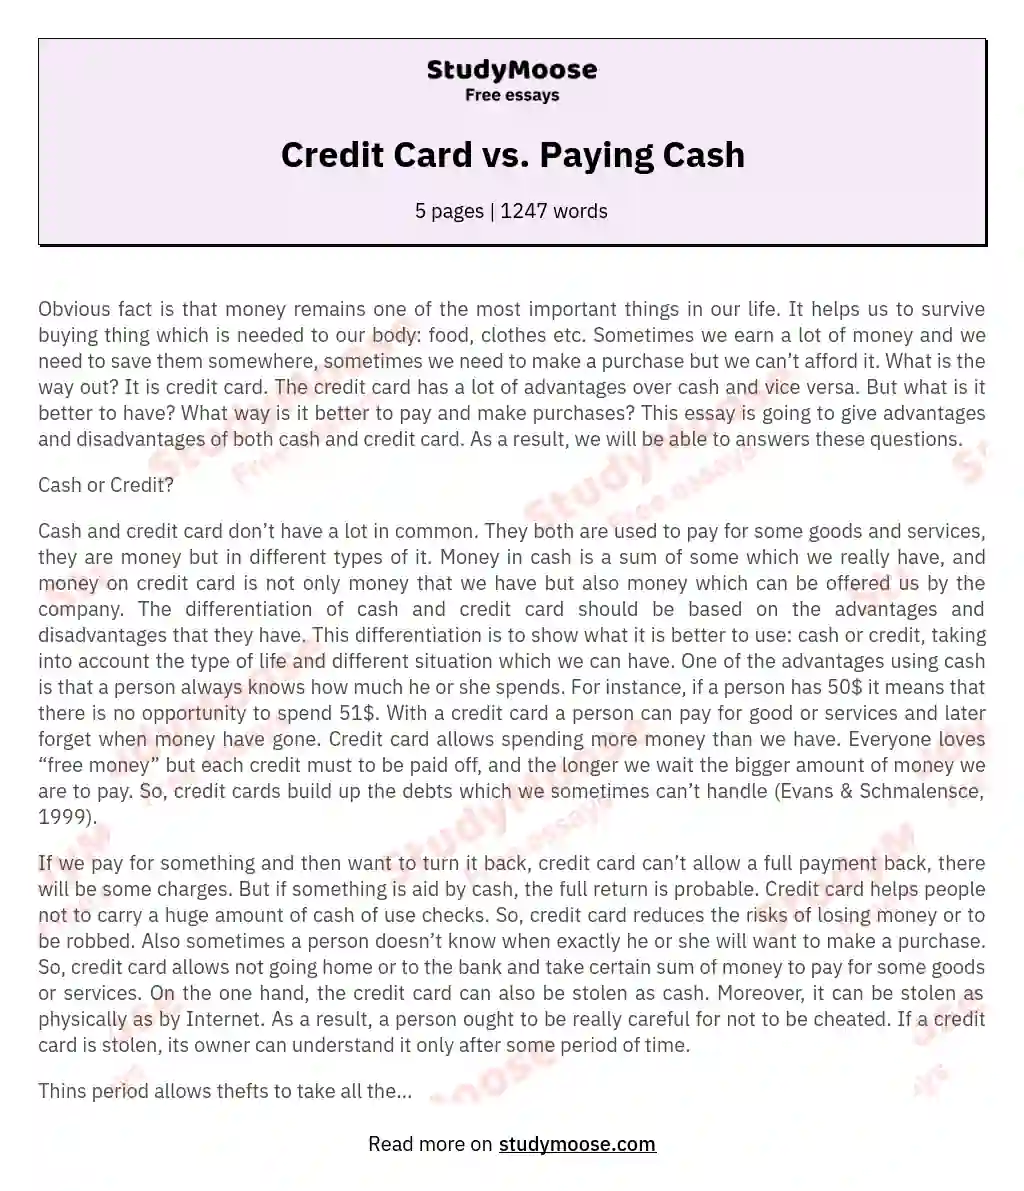 Credit Card vs. Paying Cash essay